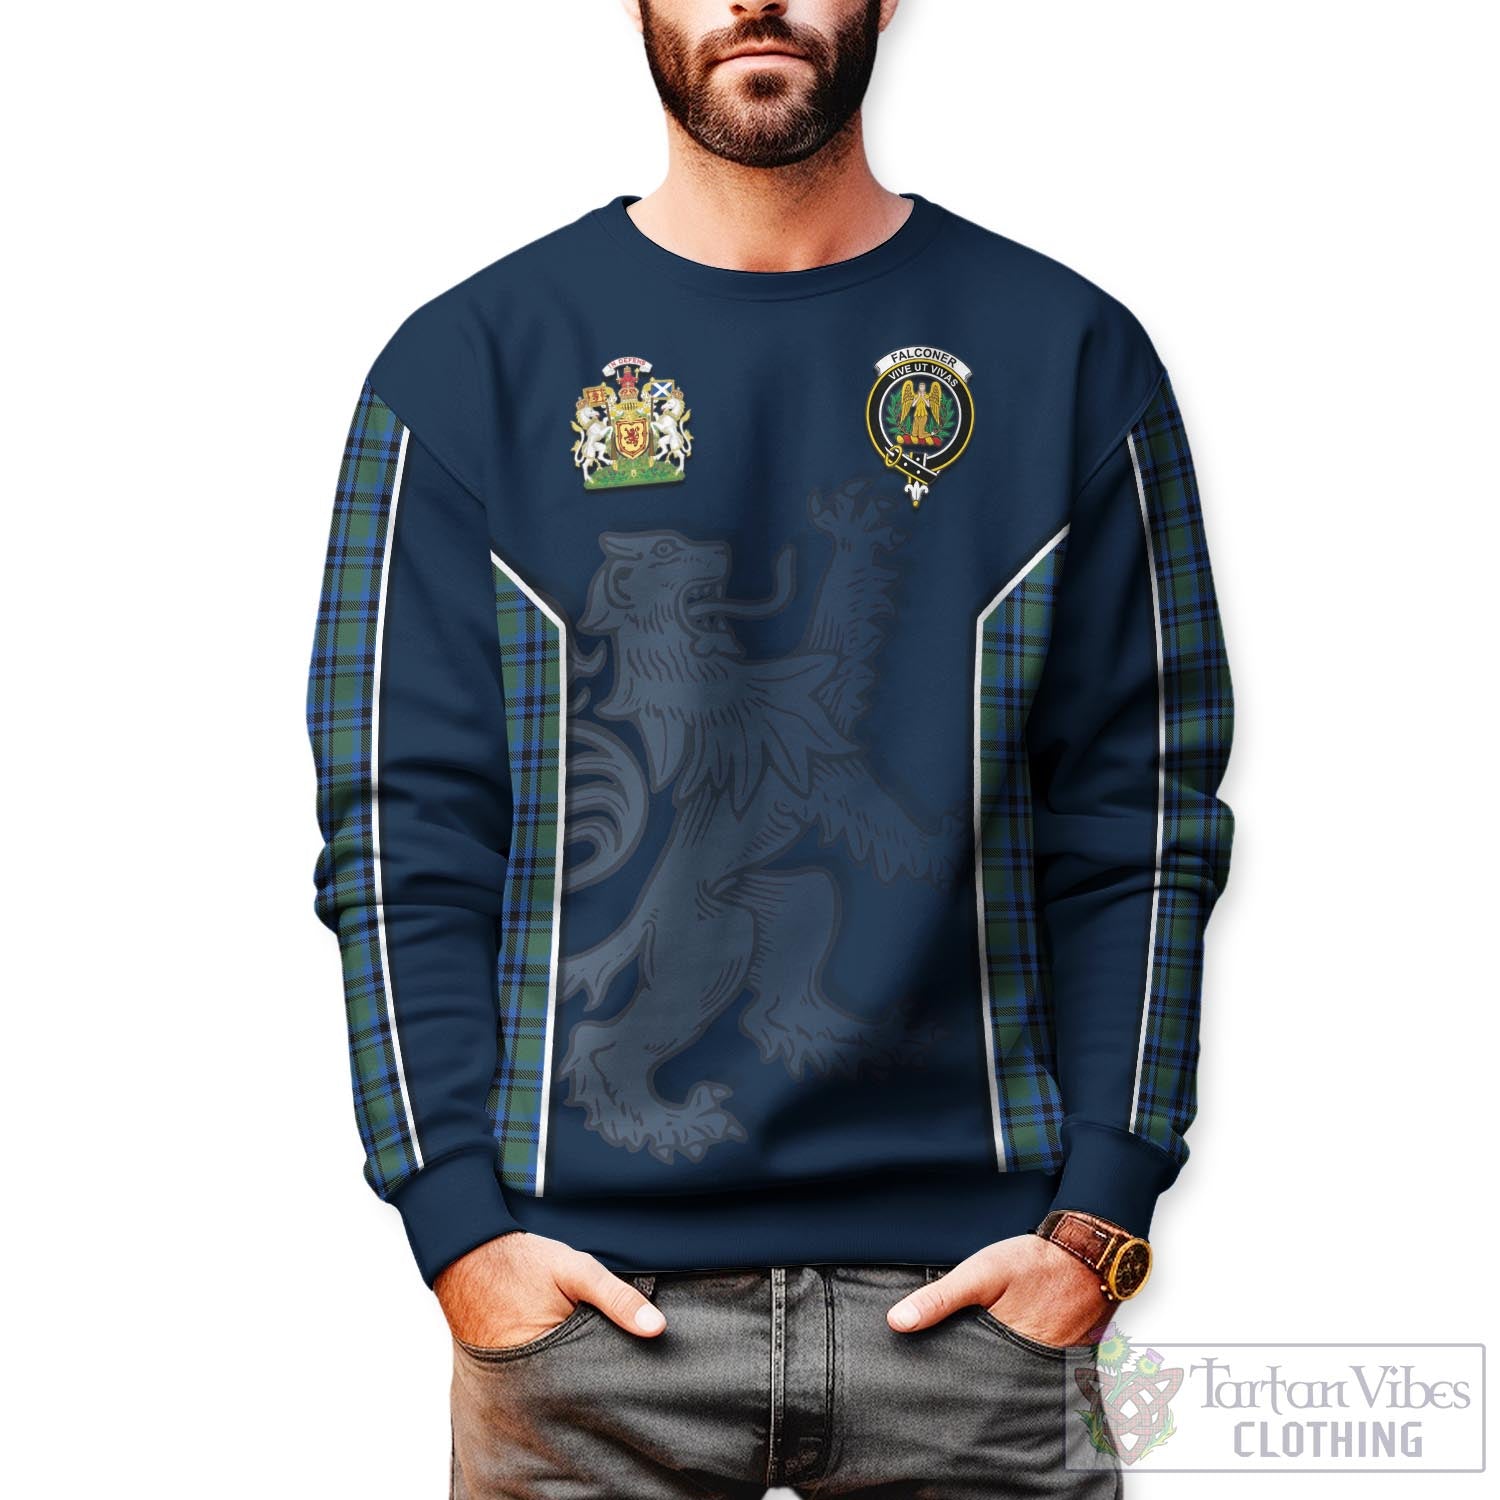 Tartan Vibes Clothing Falconer Tartan Sweater with Family Crest and Lion Rampant Vibes Sport Style